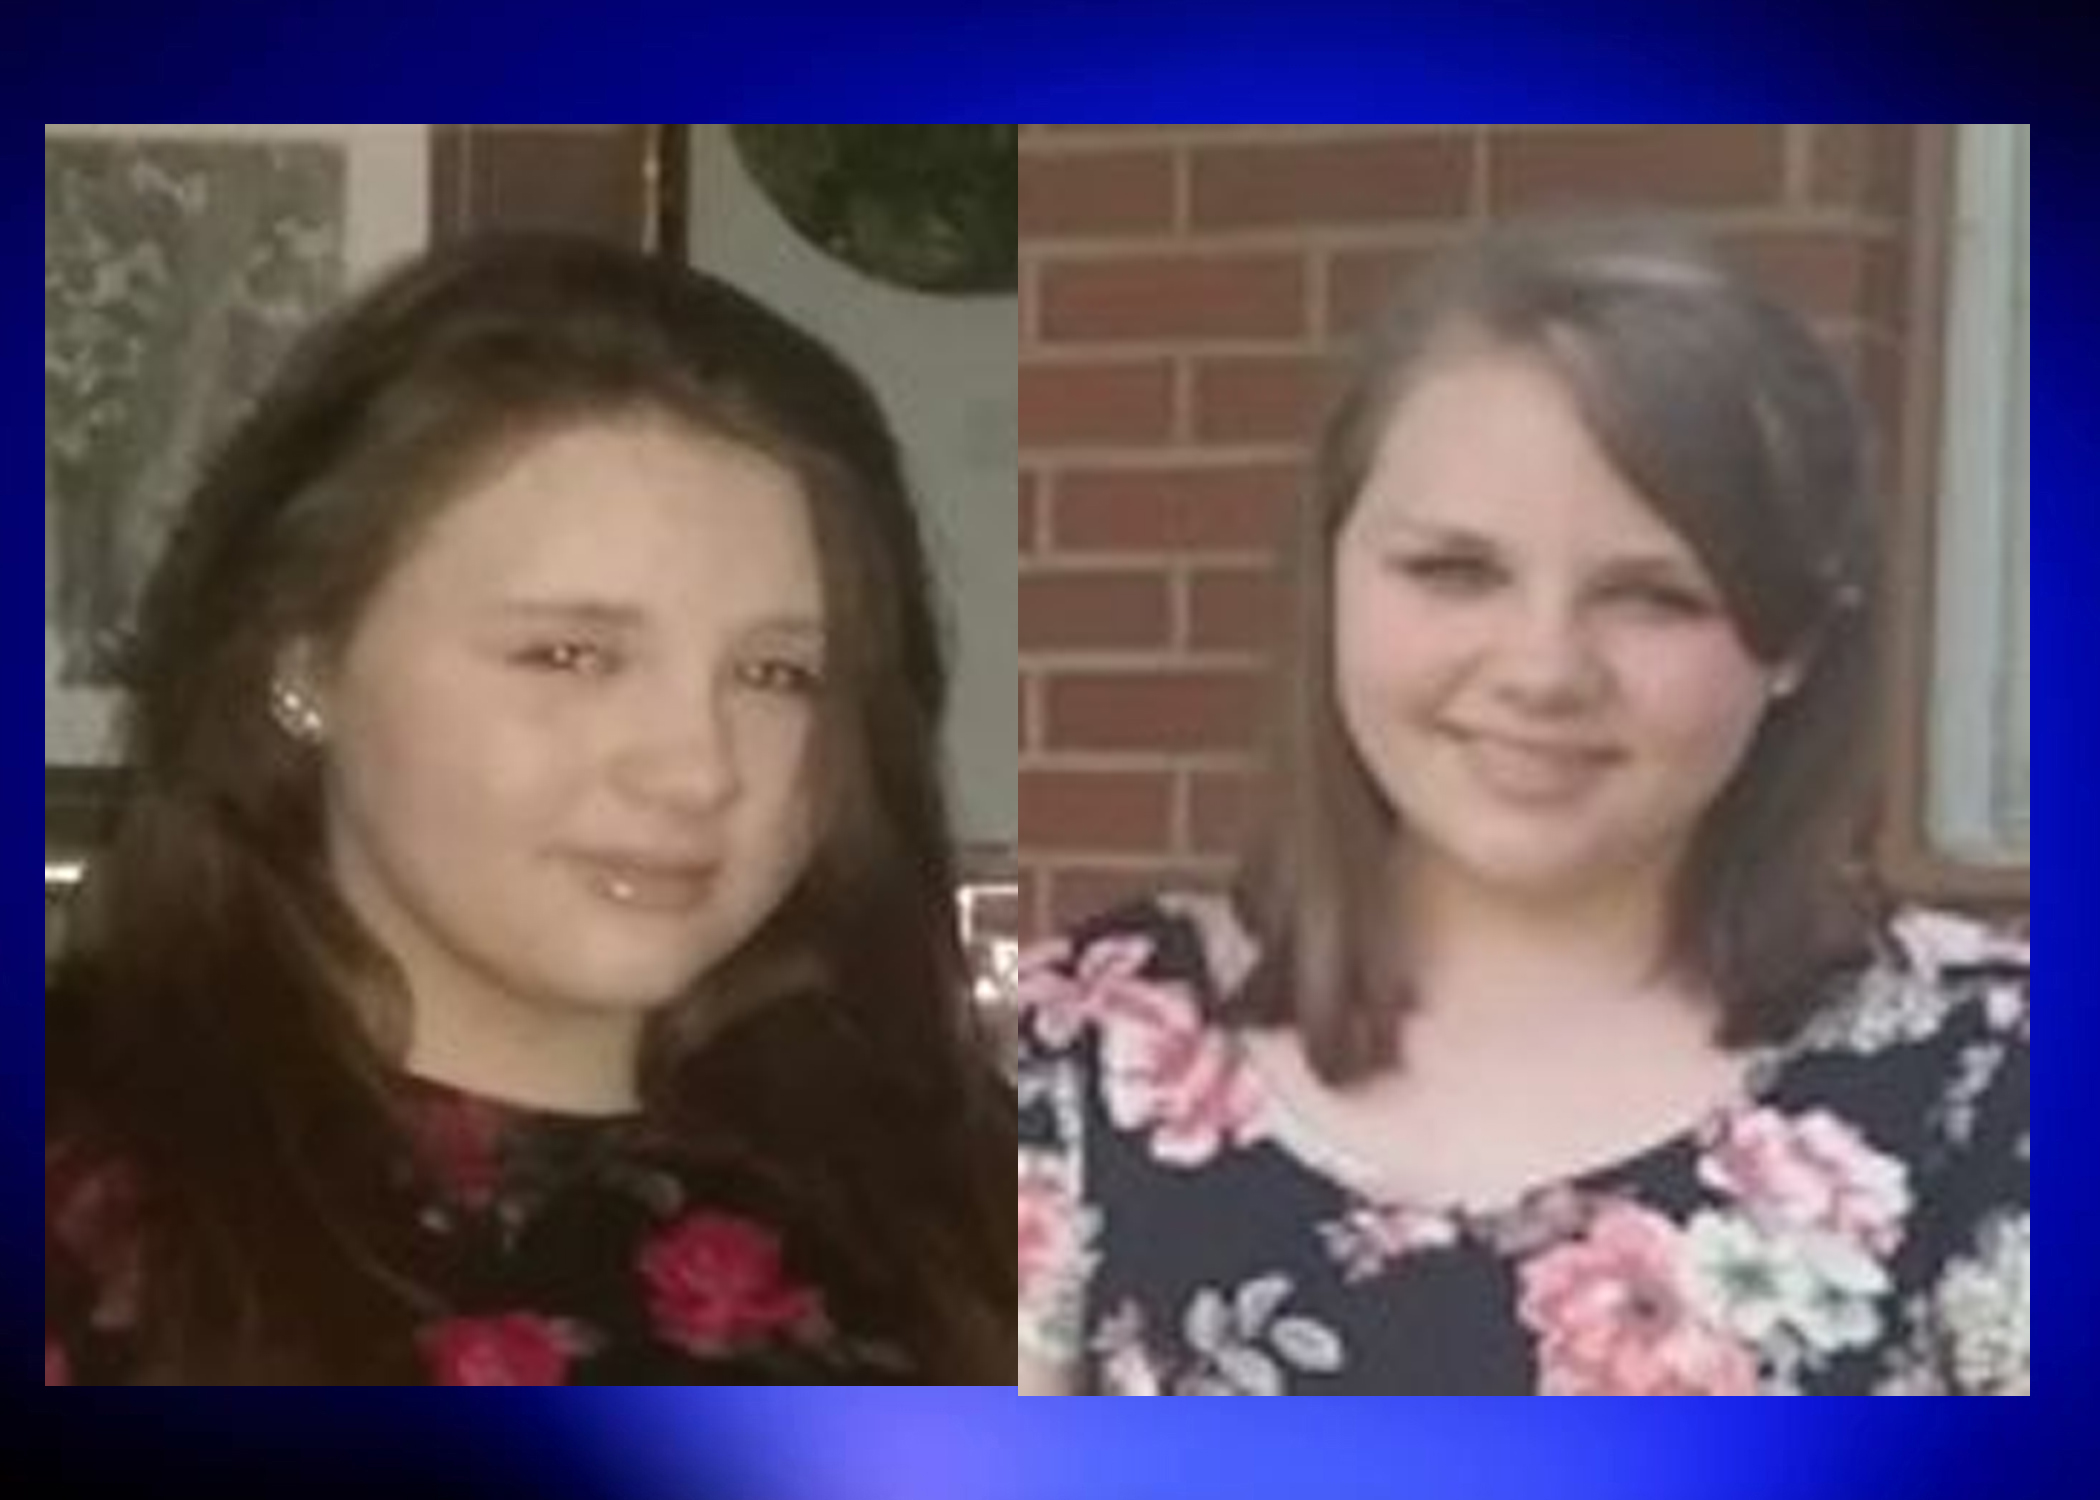 Missing Child Alert issued for 13-year-old girl